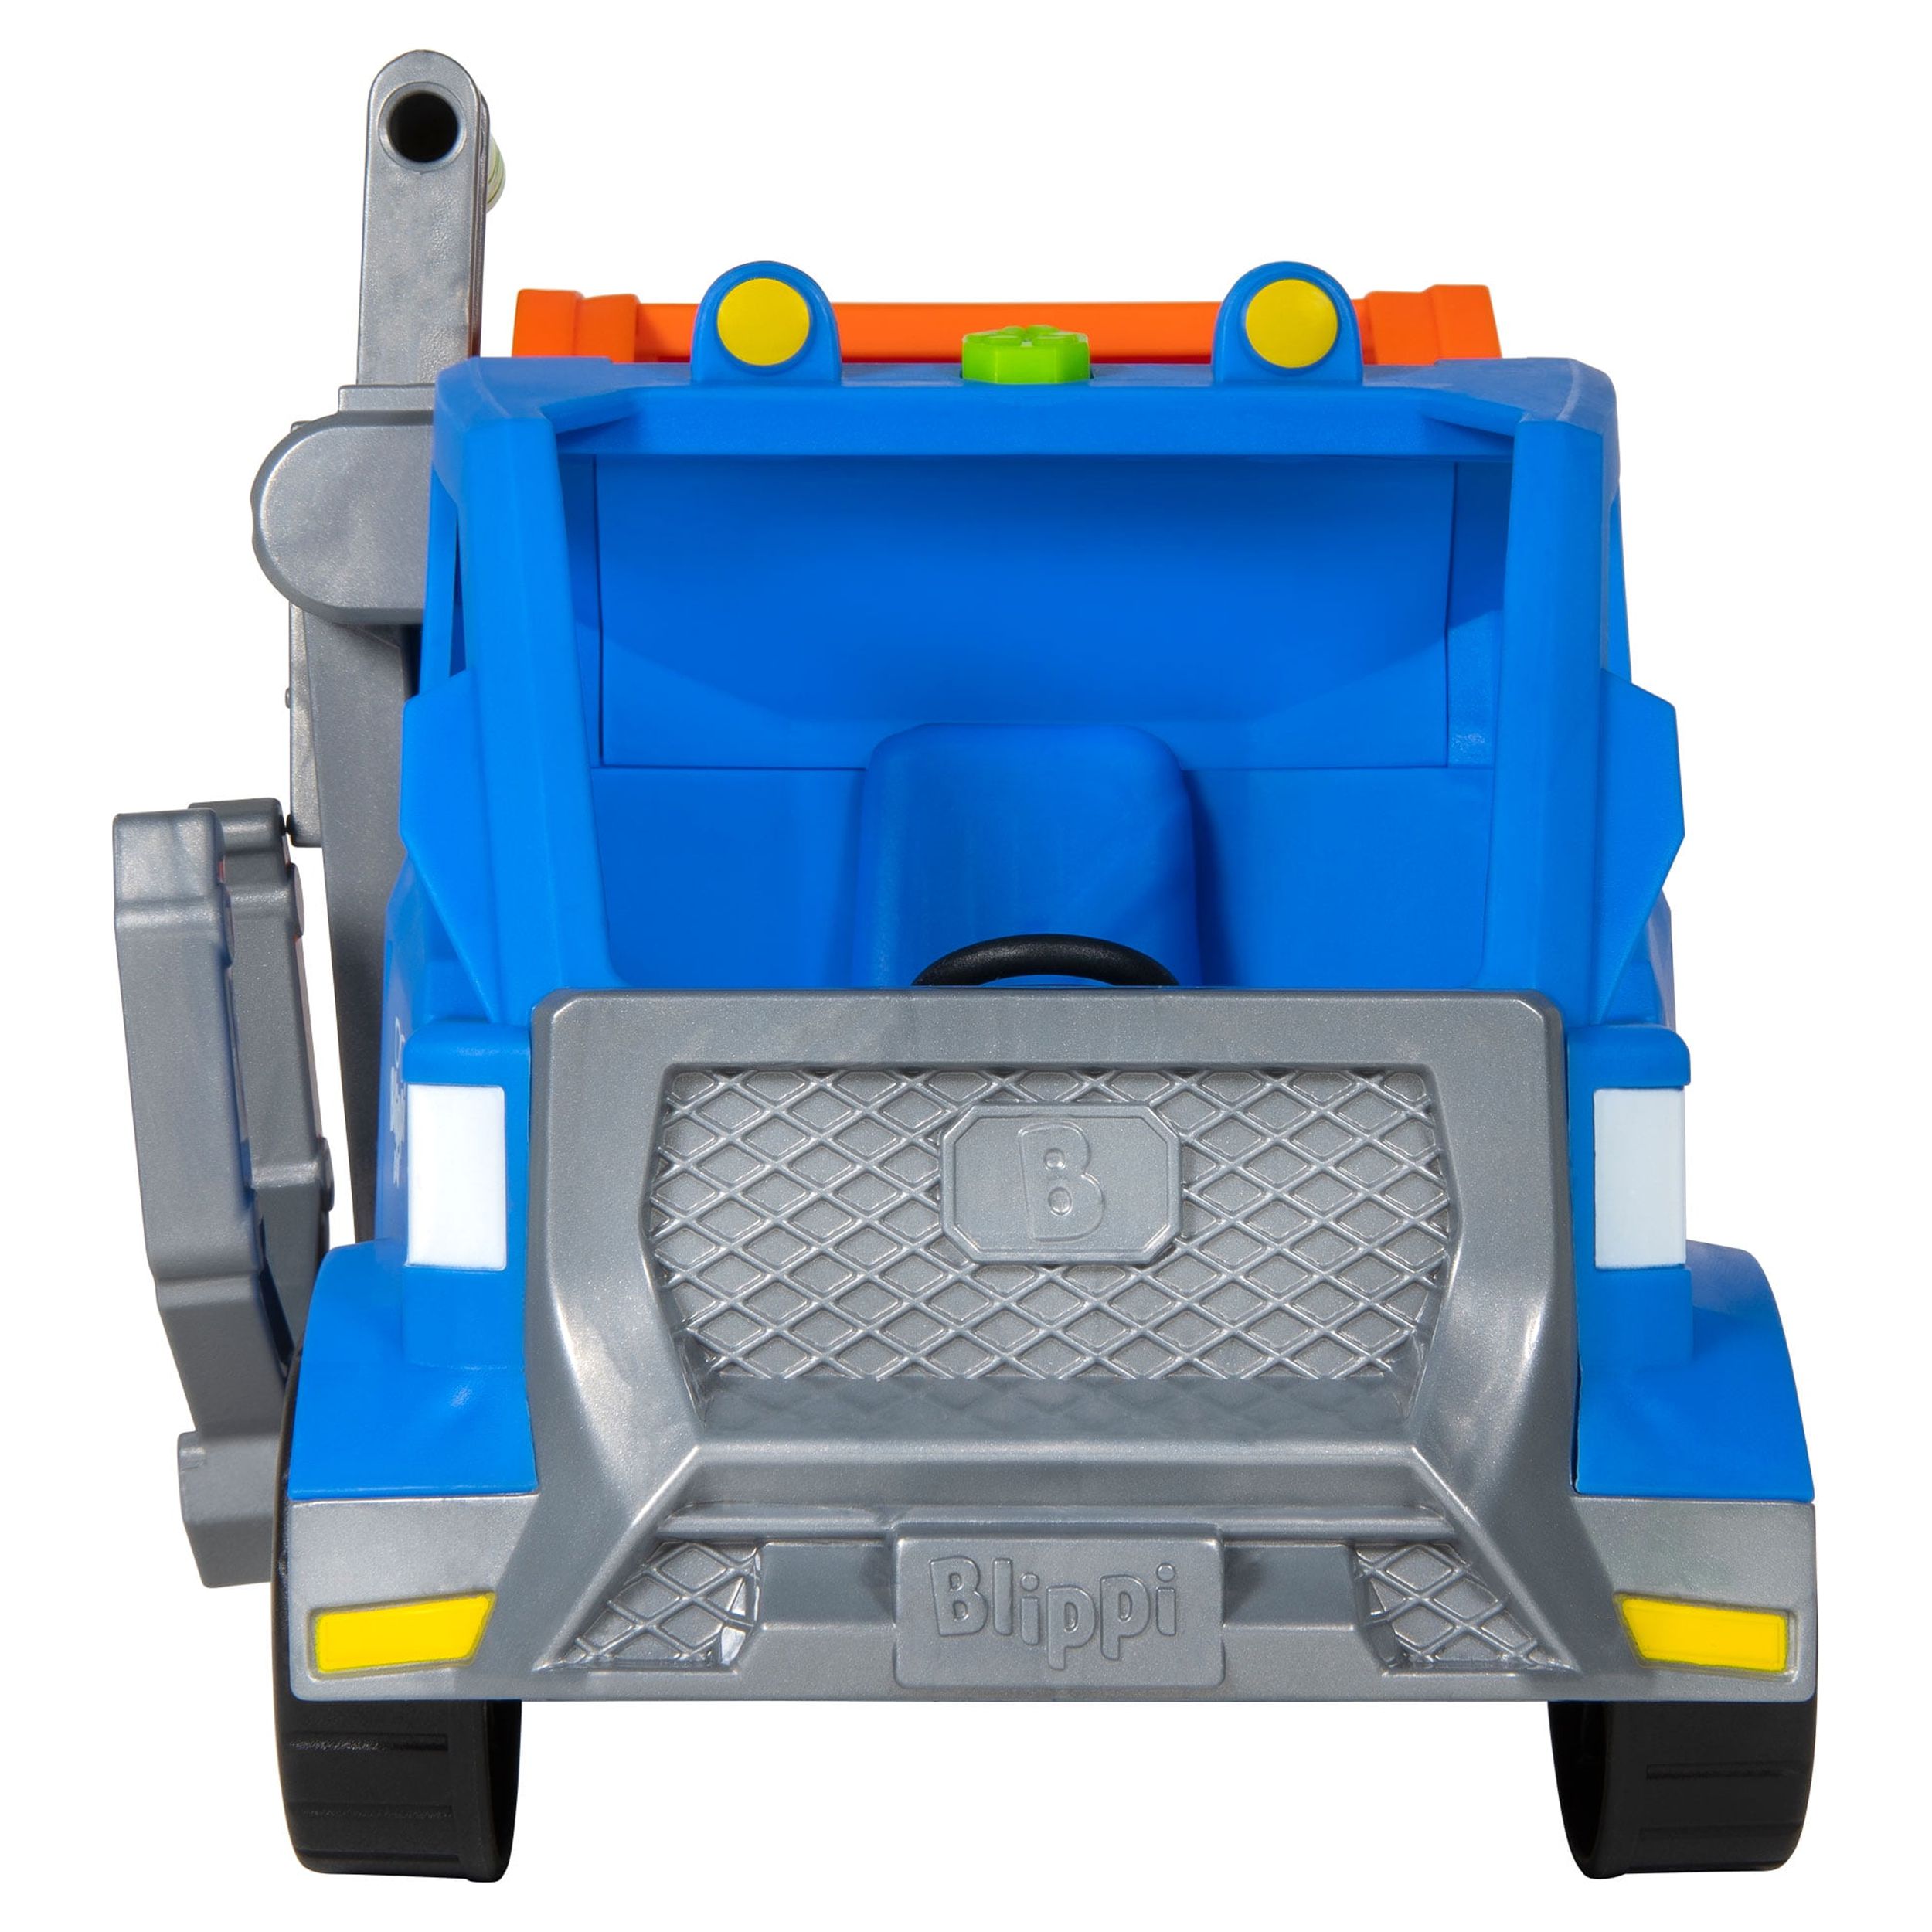 BLIPPI Recycling Truck Play Vehicle - image 11 of 18